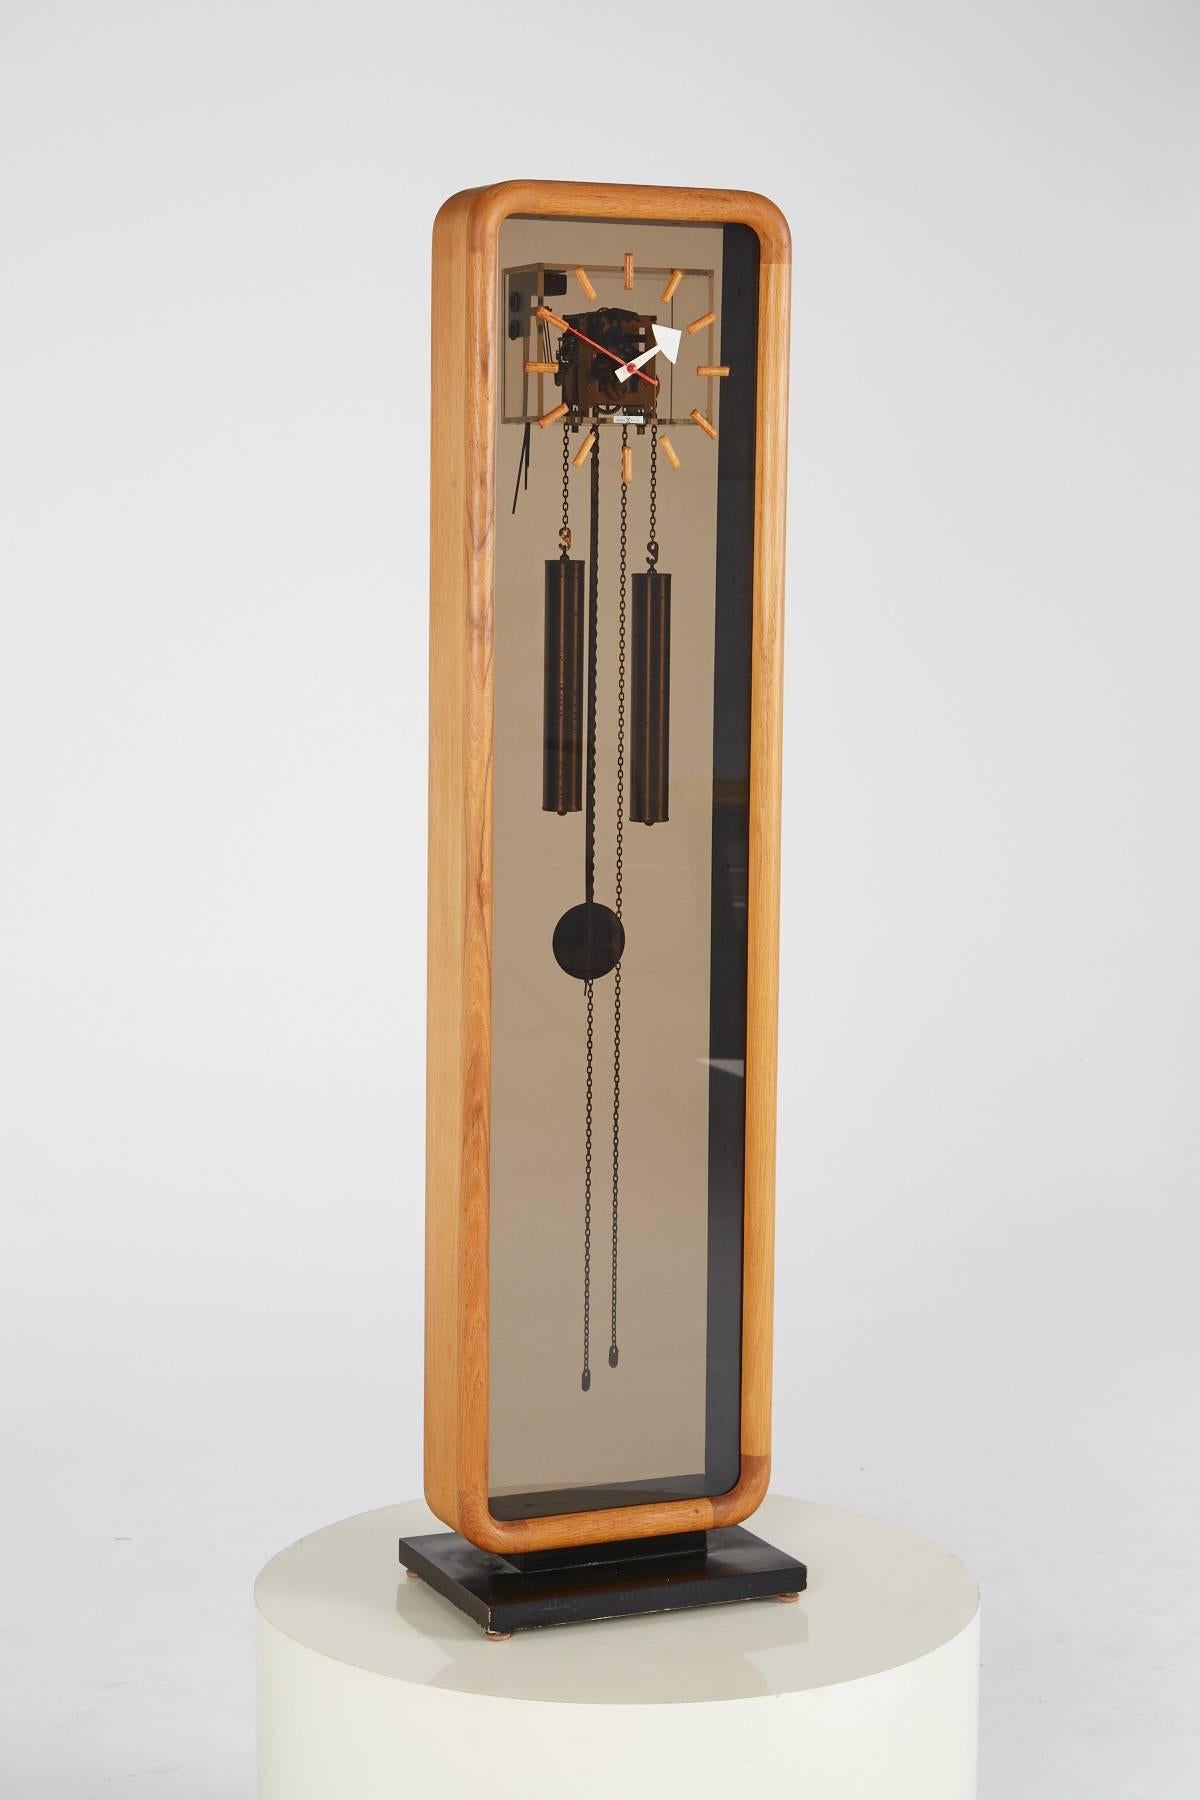 A Mid-Century Grandfather clock, designed by George Nelson for Howard Miller, Model No. 622. A wooden frame with rounded corners borders the smoked Lucite panes, displaying the inner workings of this supremely cool spin on a Classic home item.